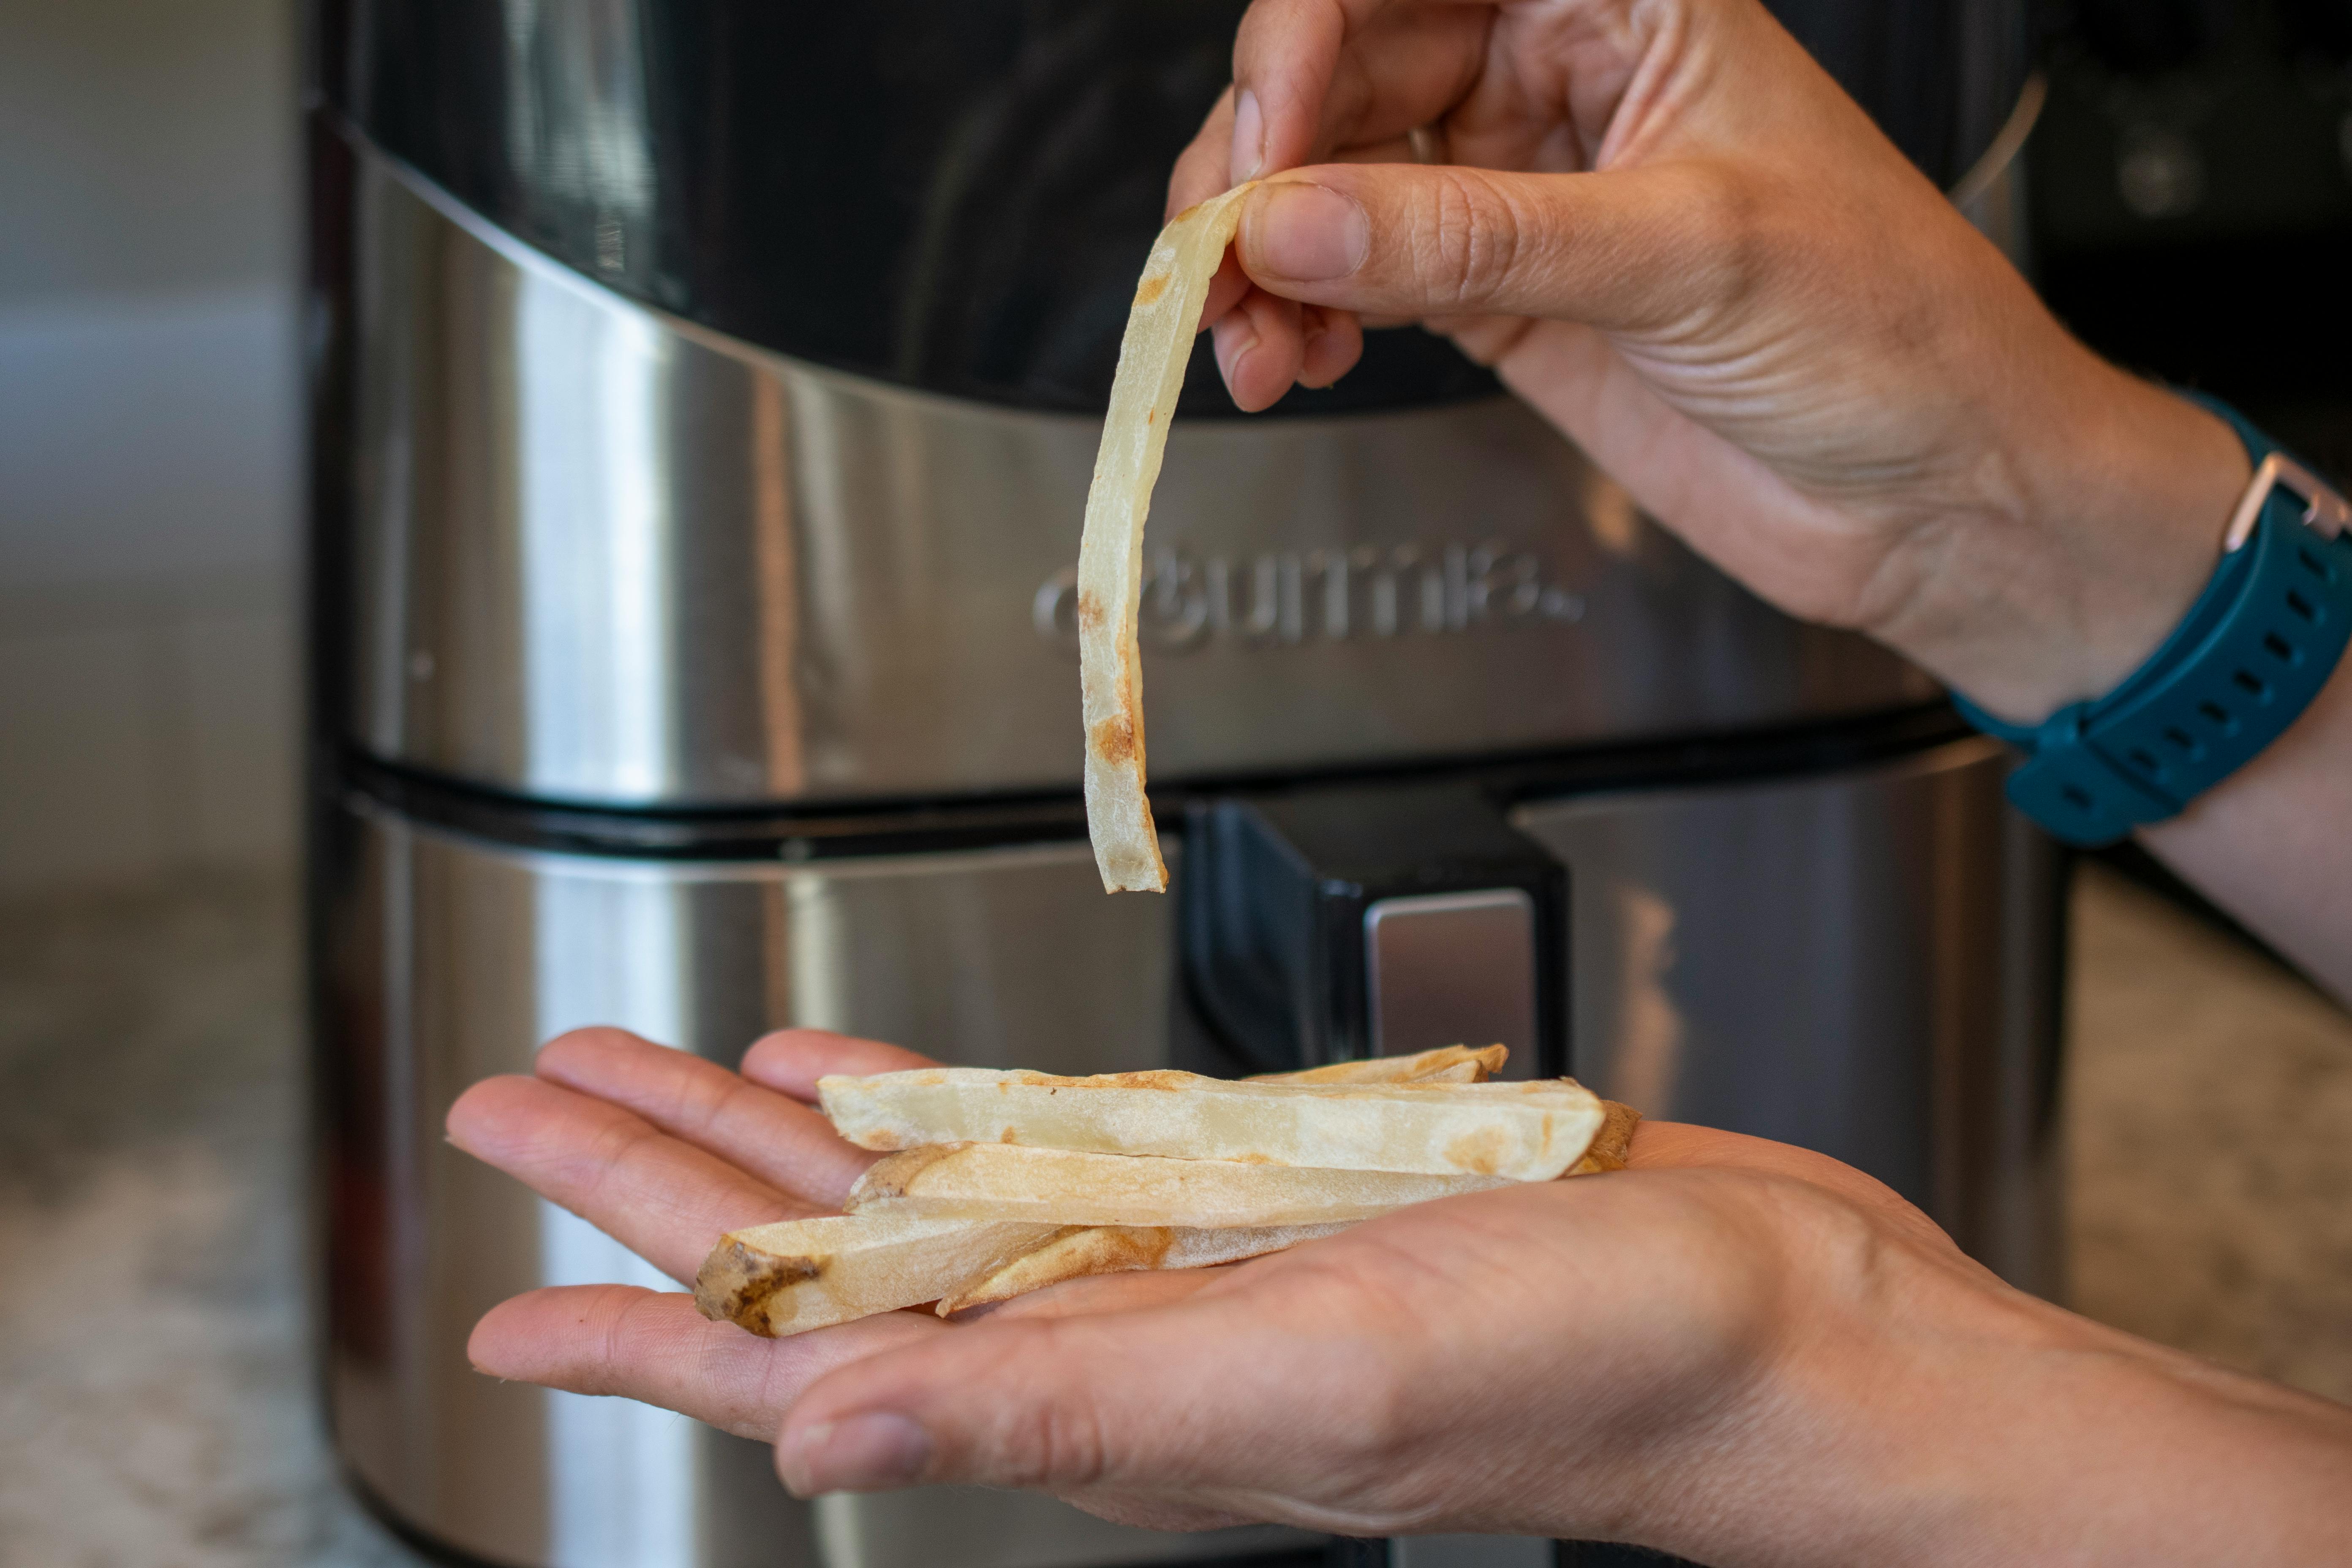 A person's hands holding some limp, dry-looking french fries in front of an air fryer.